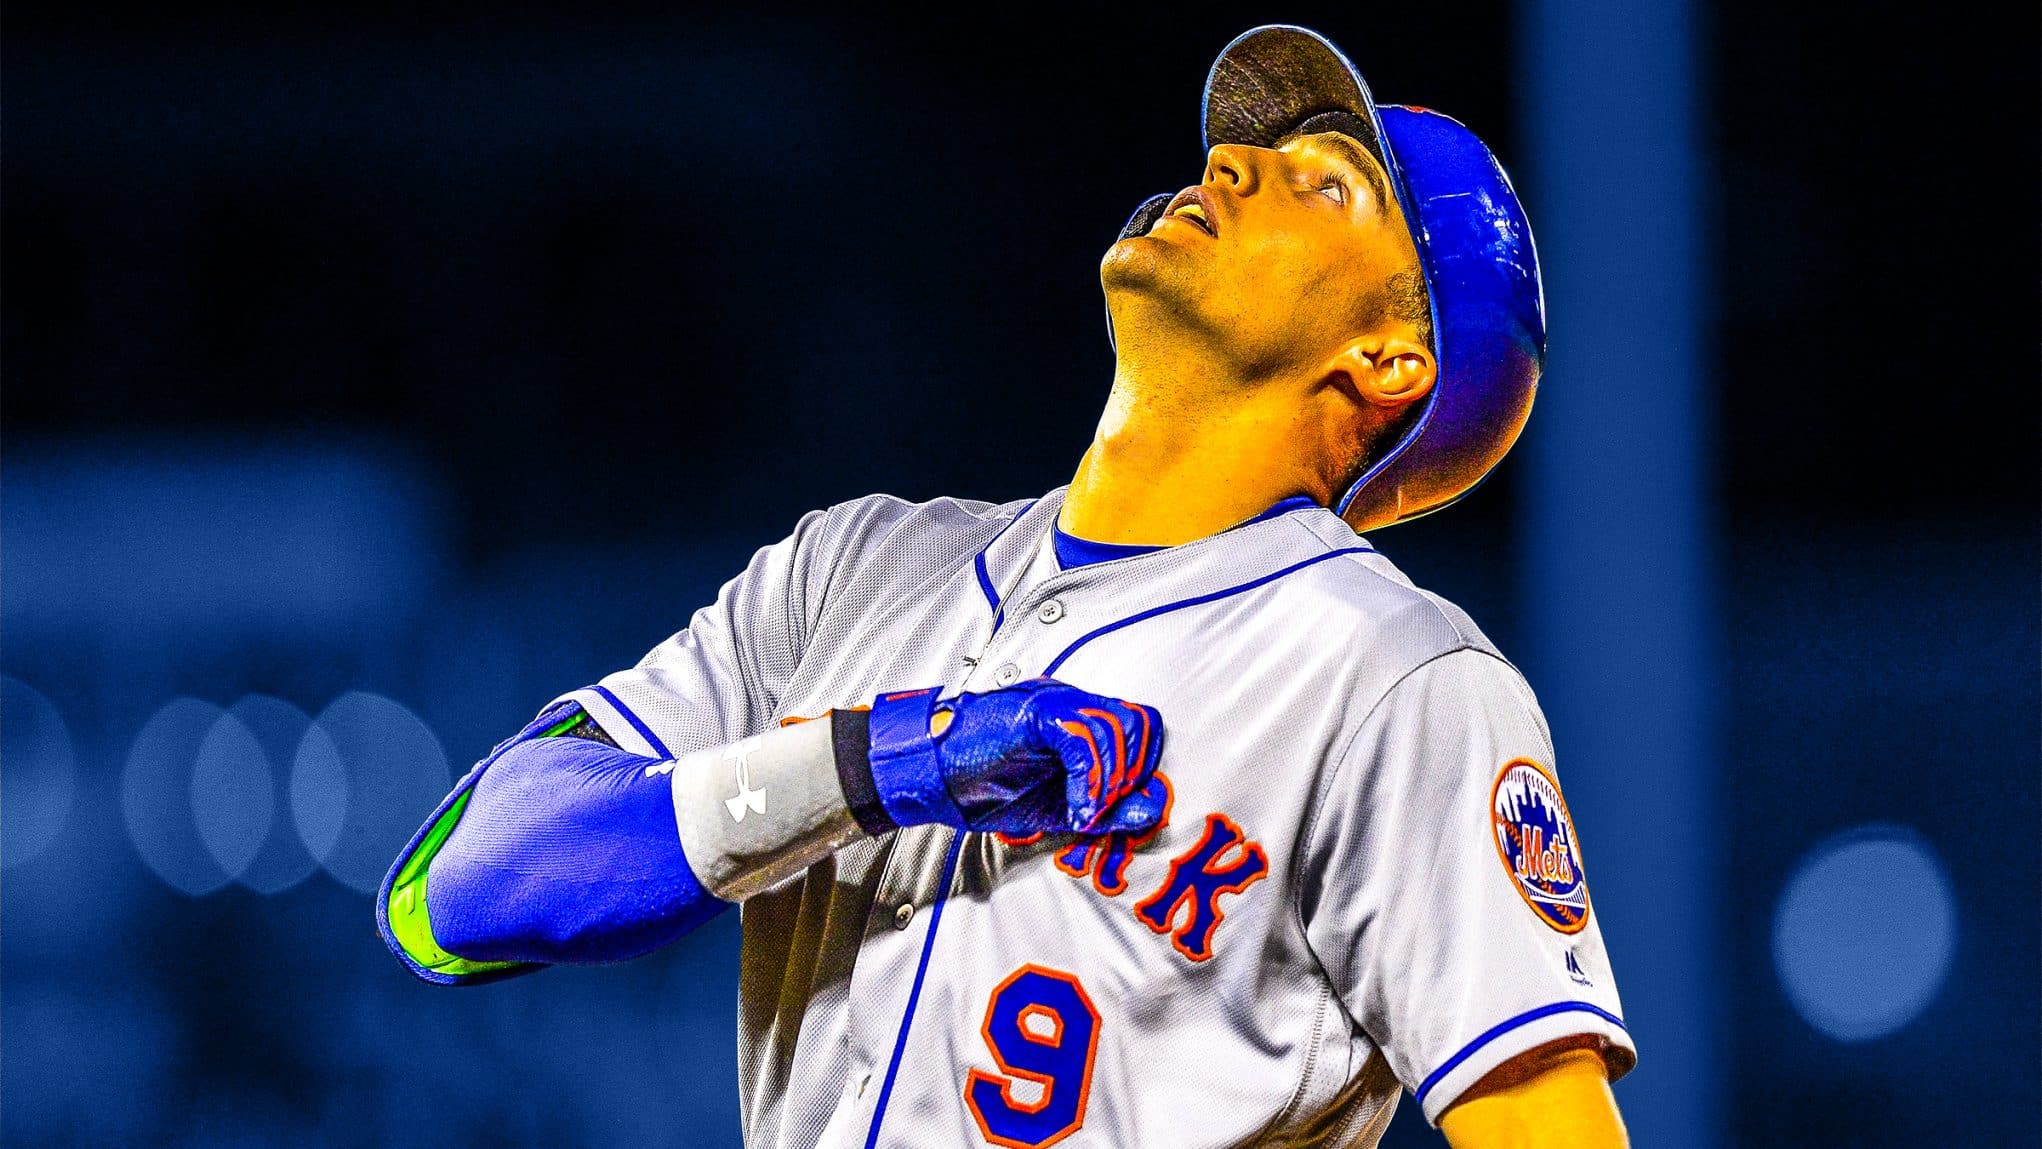 ESNY's New York Mets 2019 Preview, Predictions: The sleeping surprise